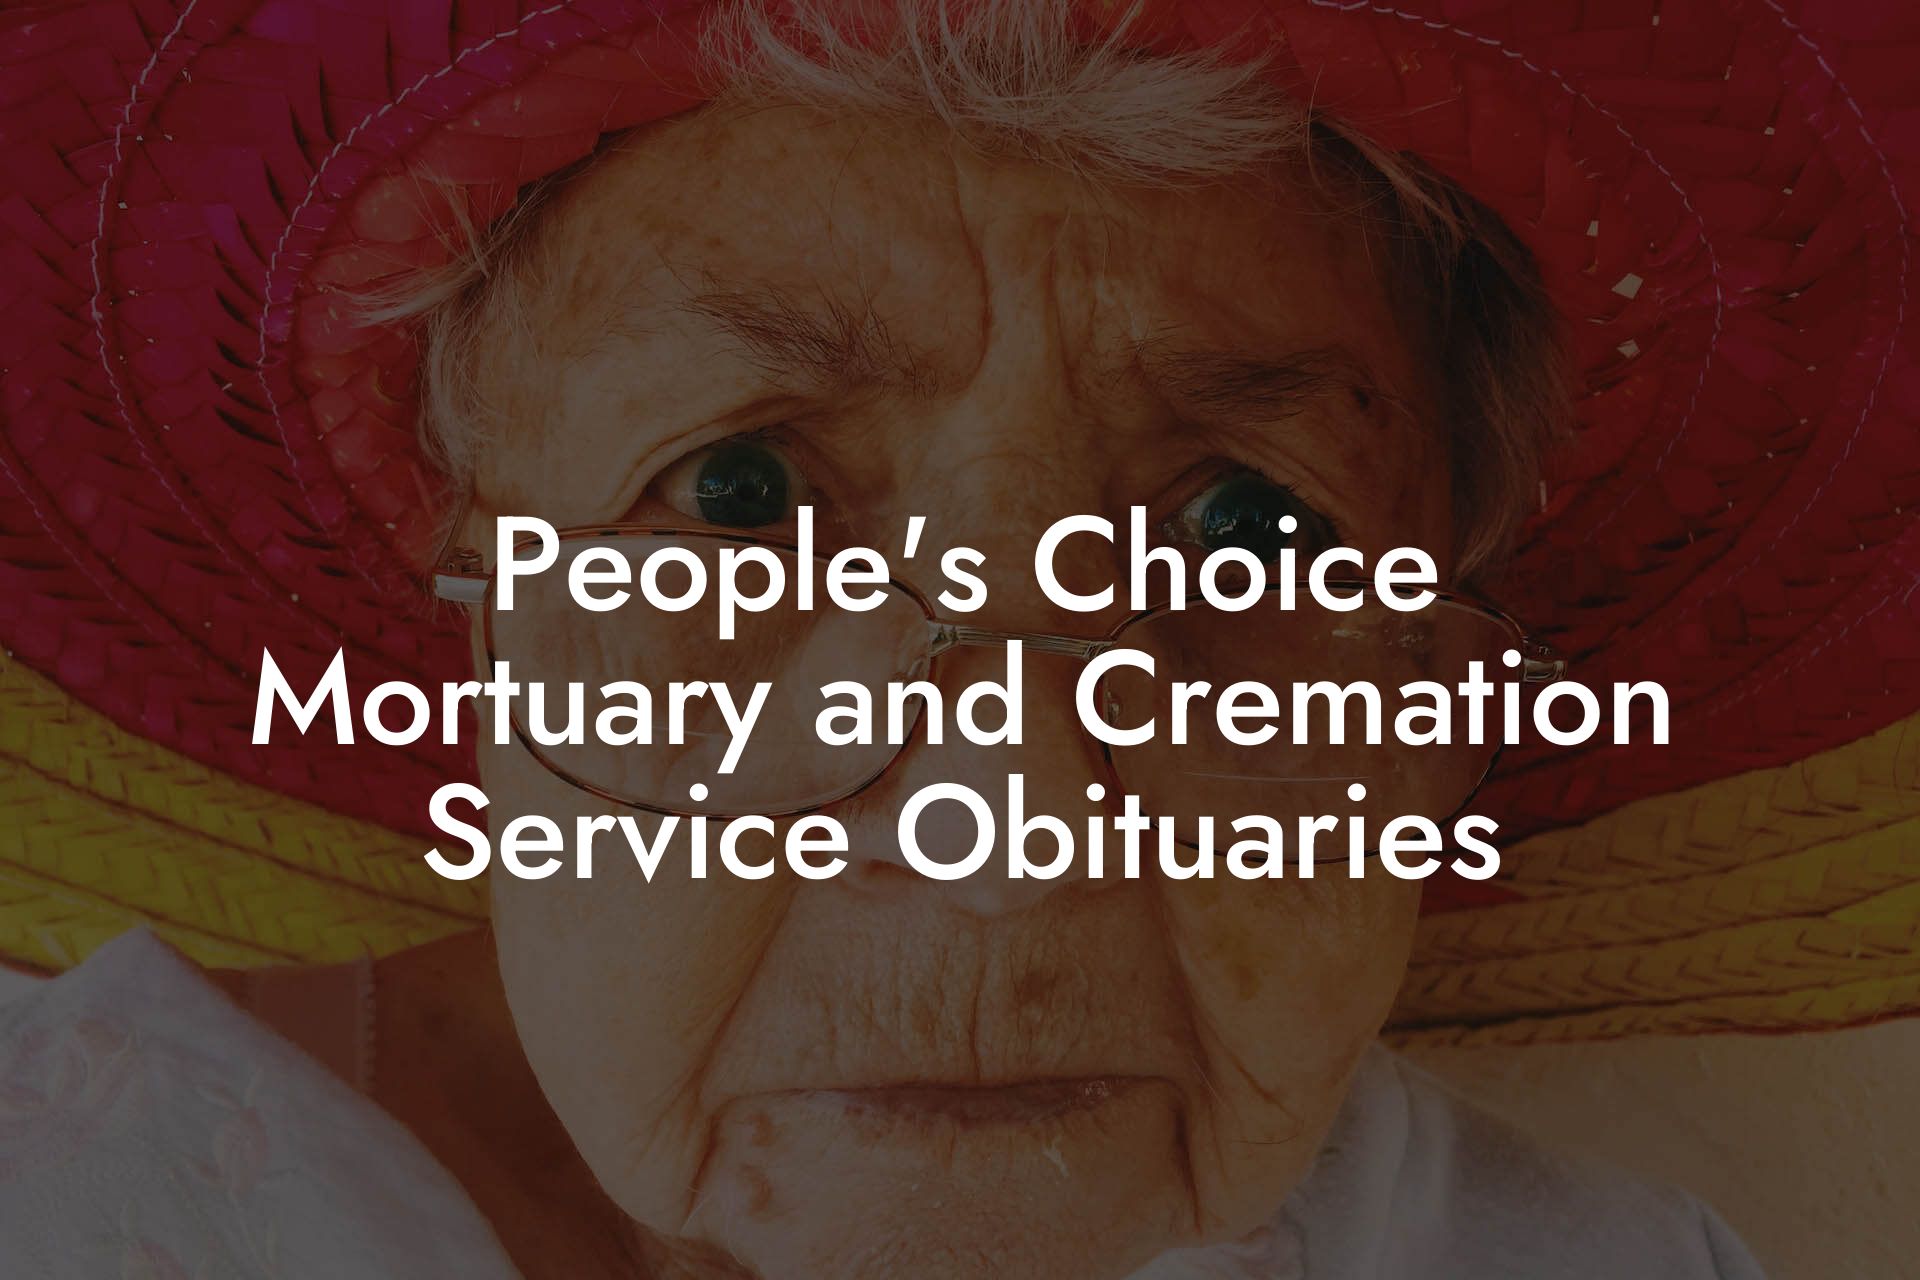 People's Choice Mortuary and Cremation Service Obituaries